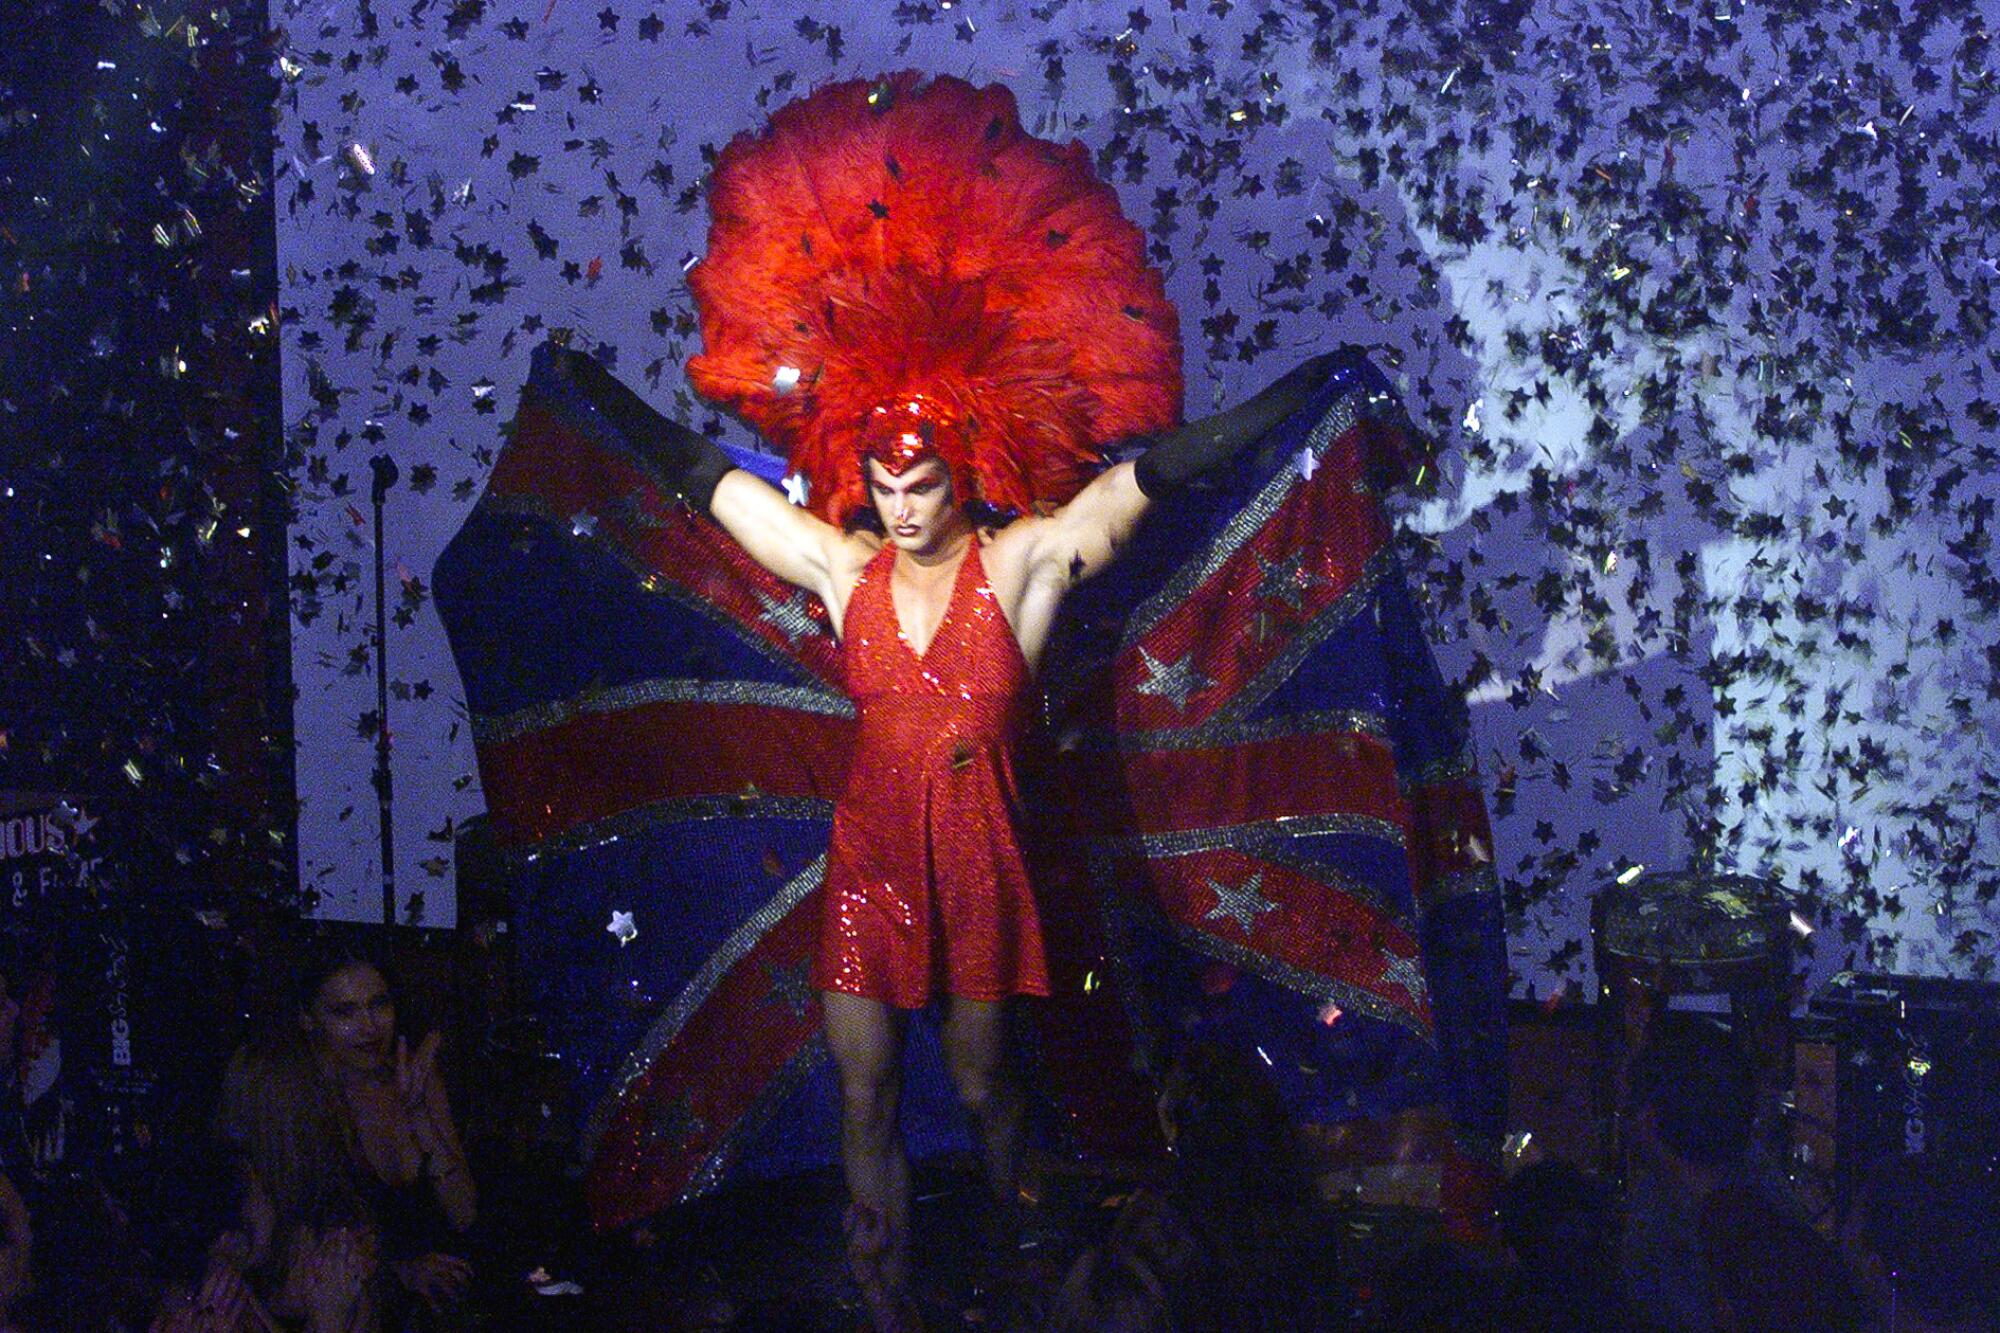 A drag performer in a red gown and large red feathered headdress onstage.